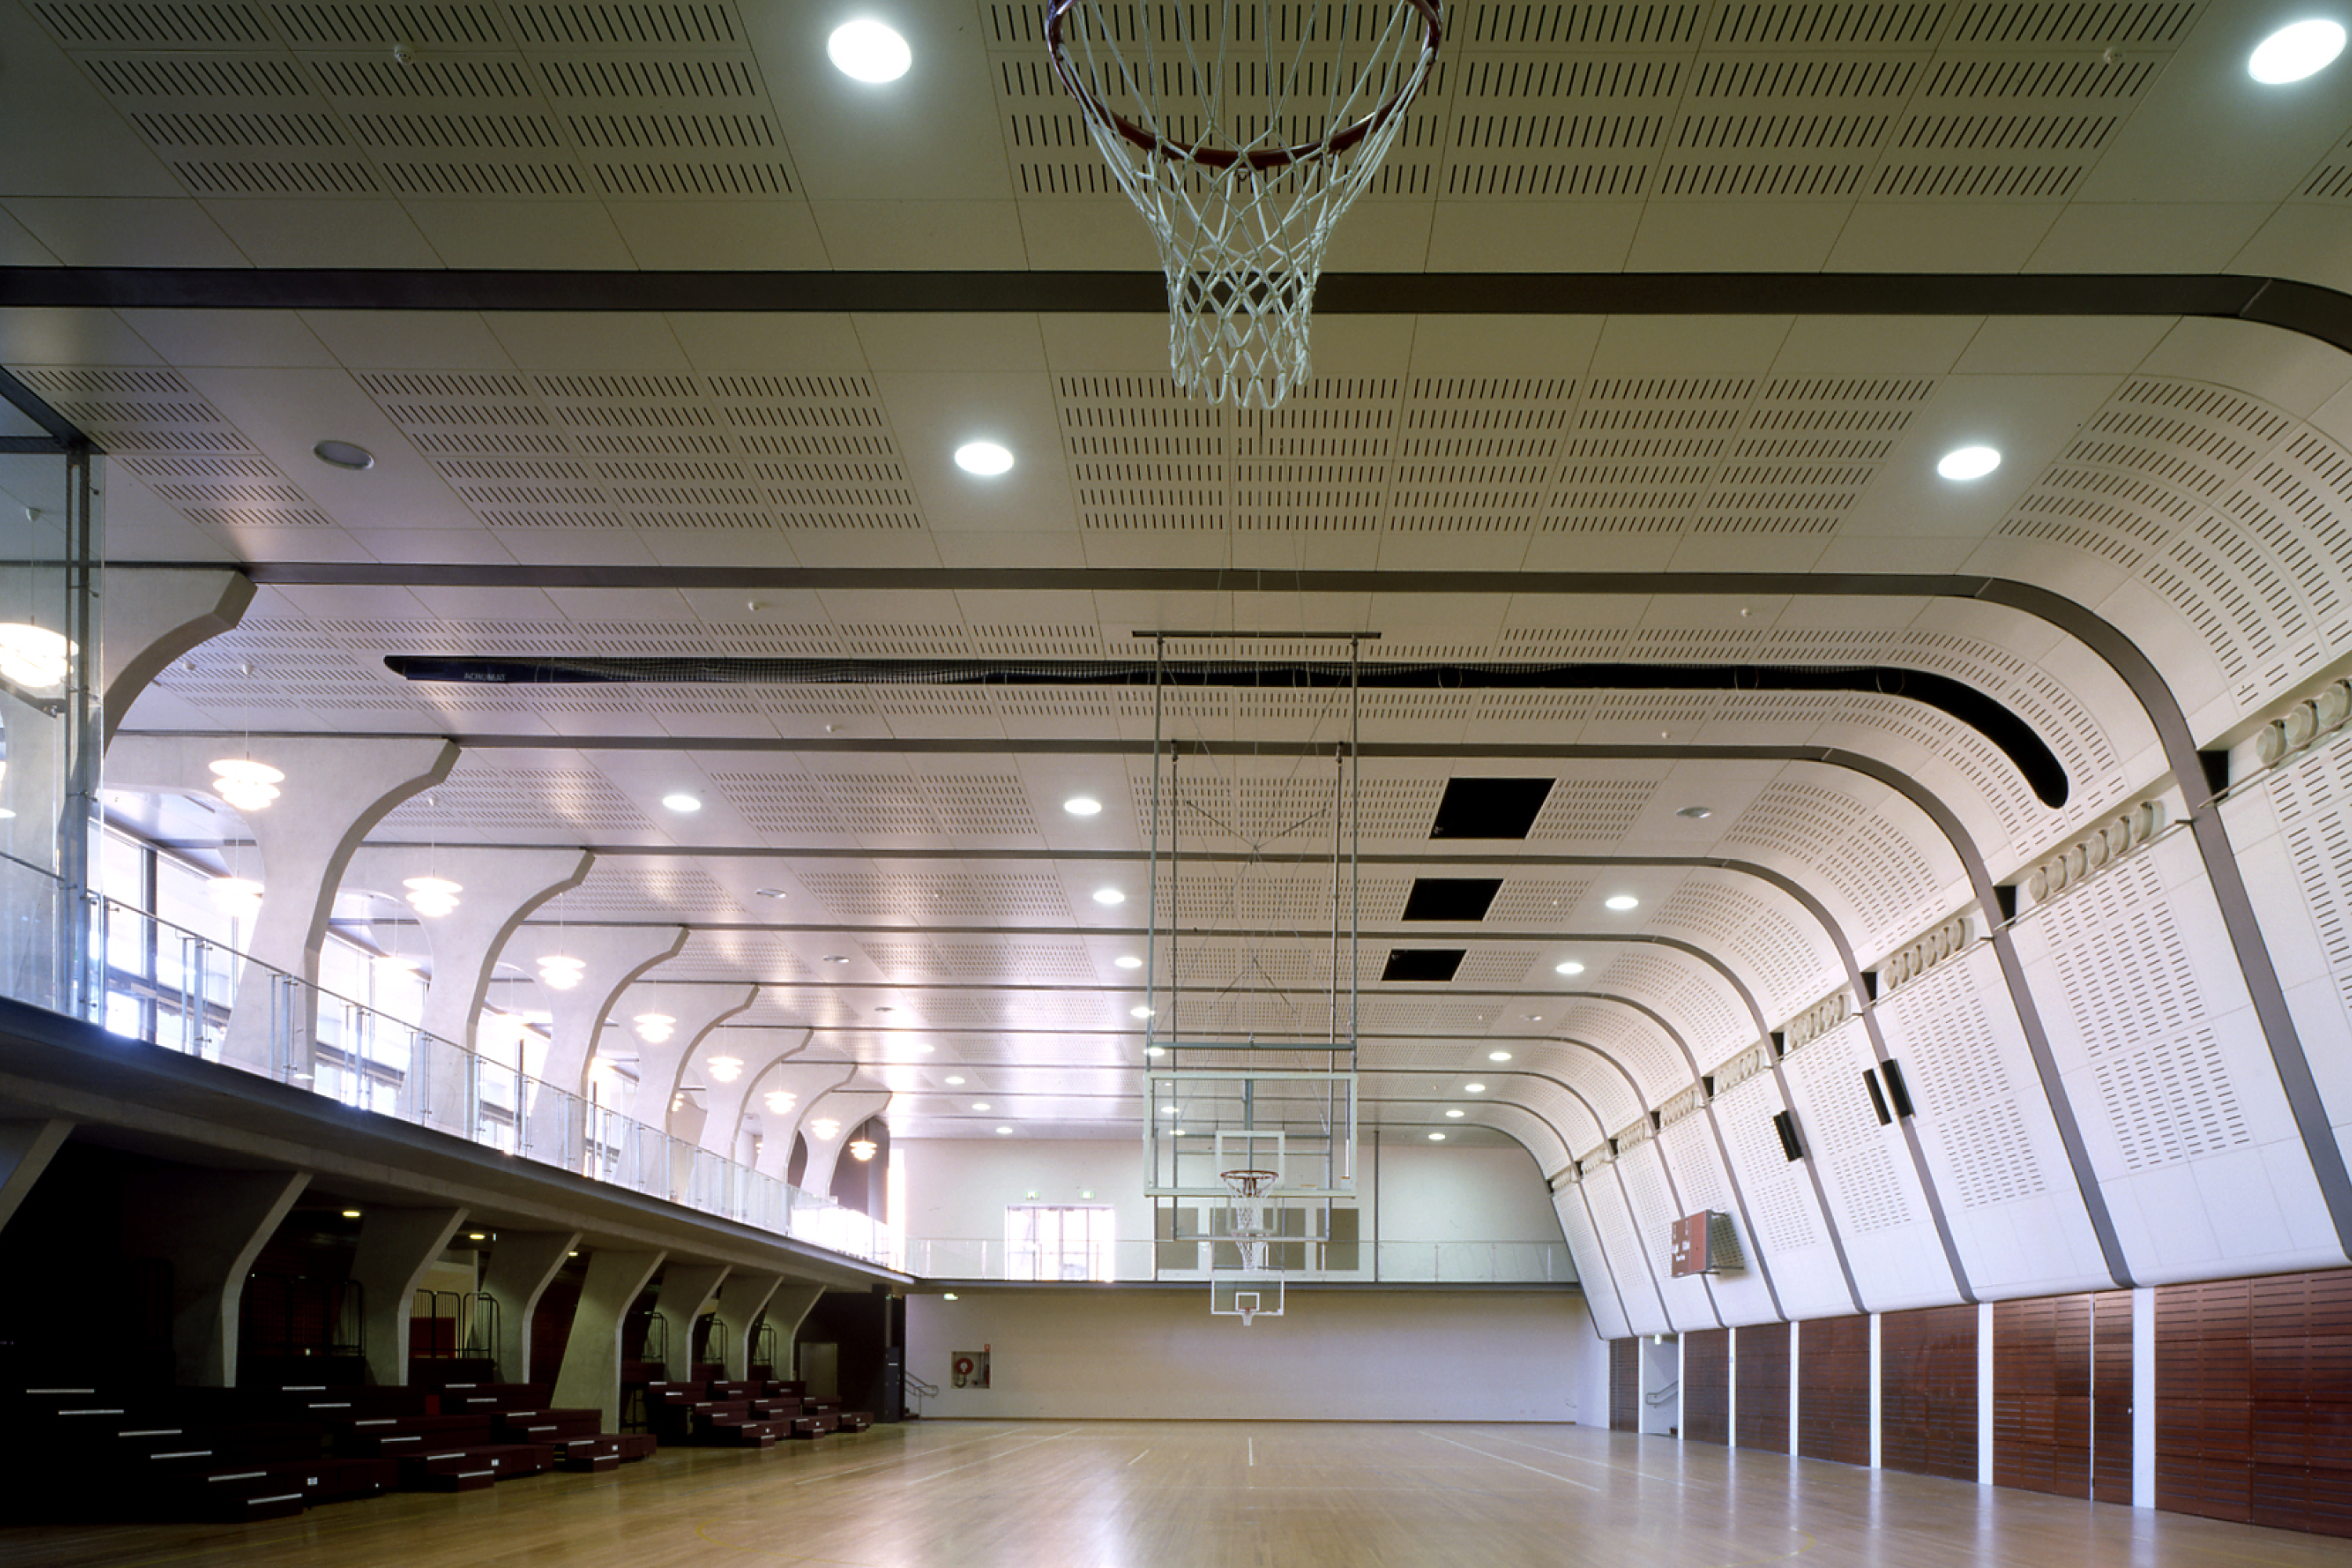 Photograph of interiors of the award-wining St Catherine's Sport Centre designed by Tzannes